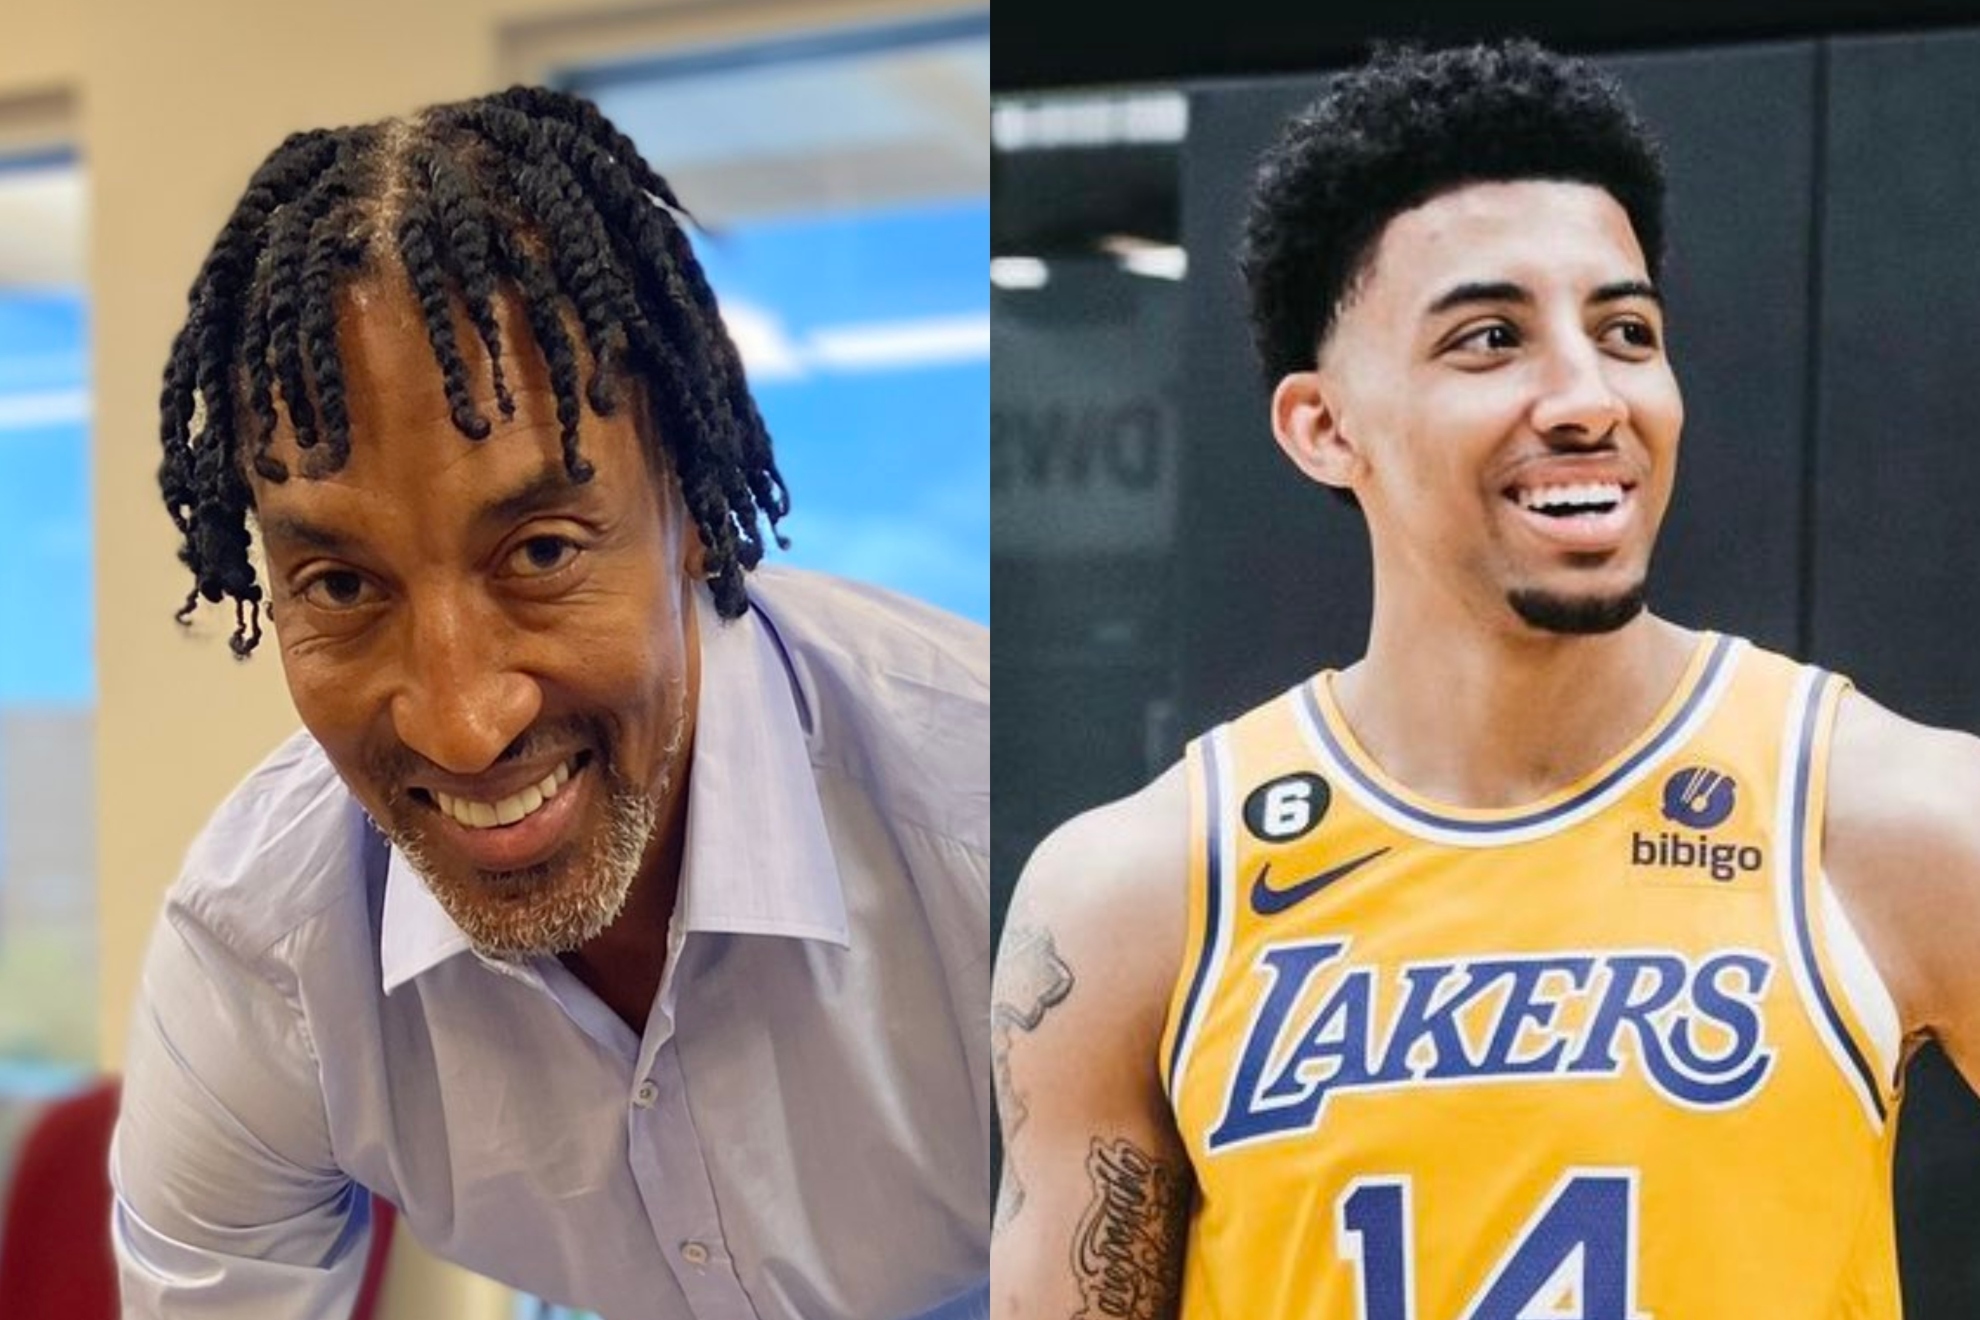 Have dinner with Scottie Pippen and his son for $300K